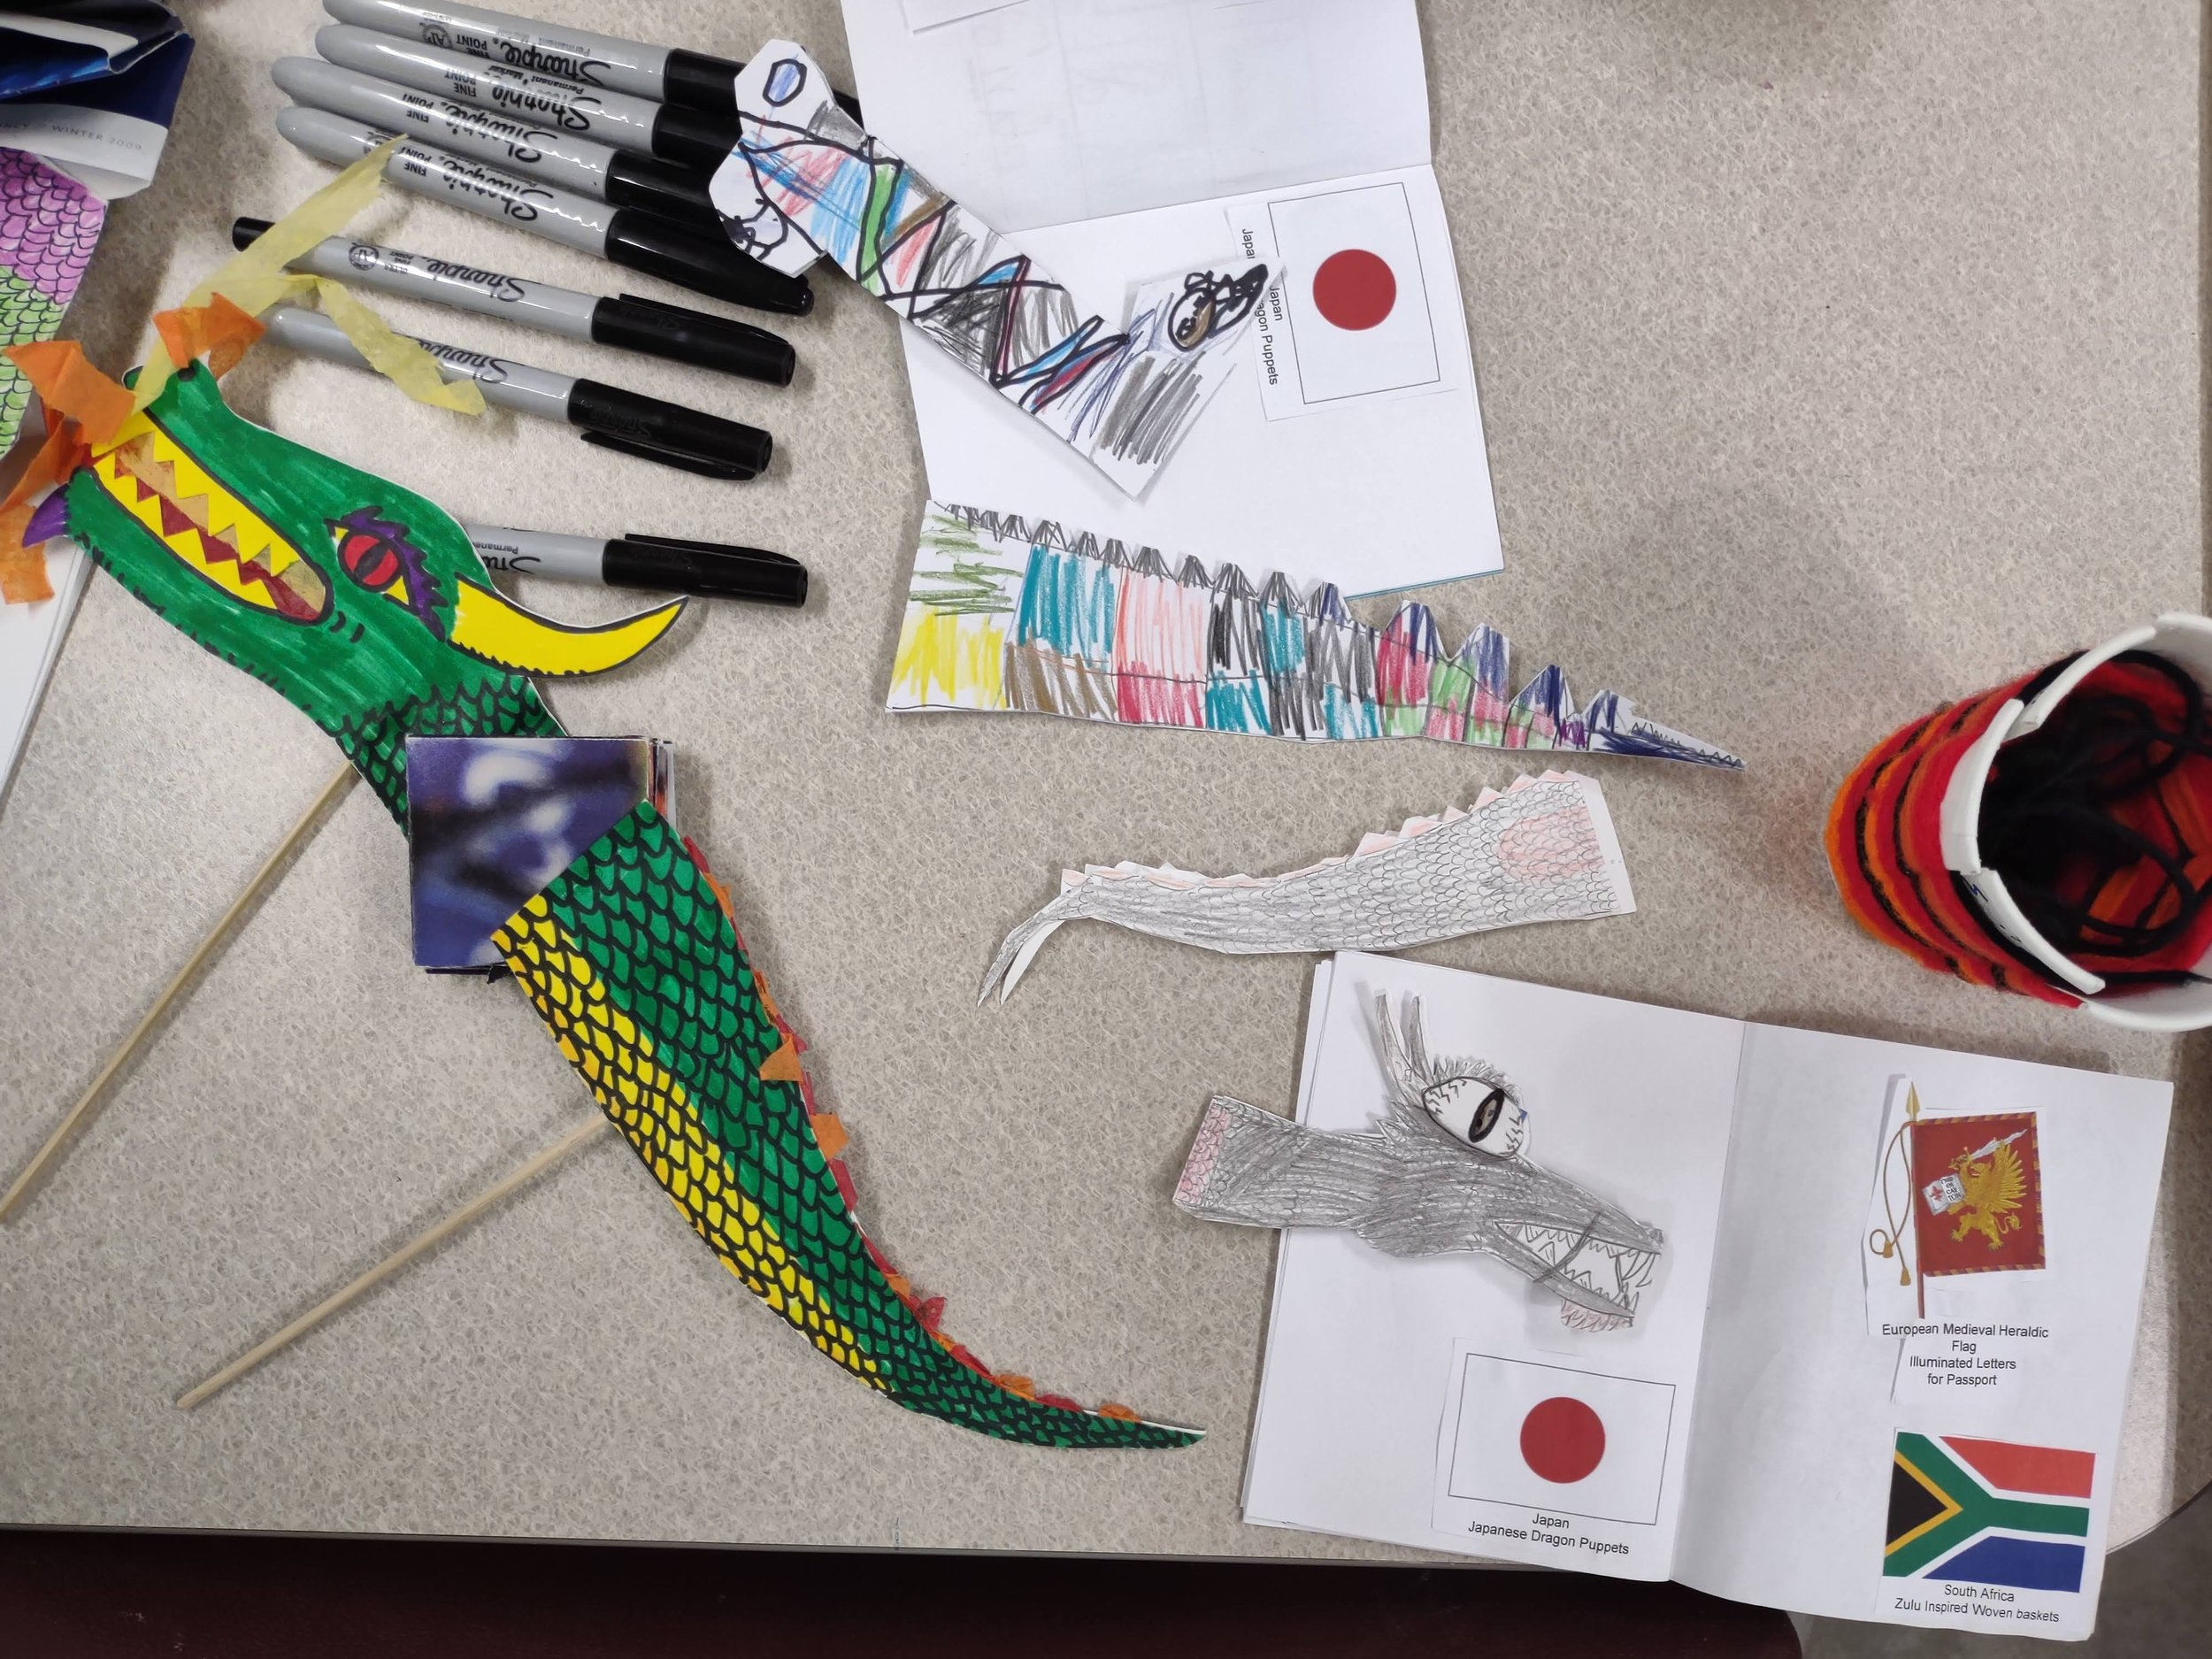 Working on Japanese Dragon Puppets